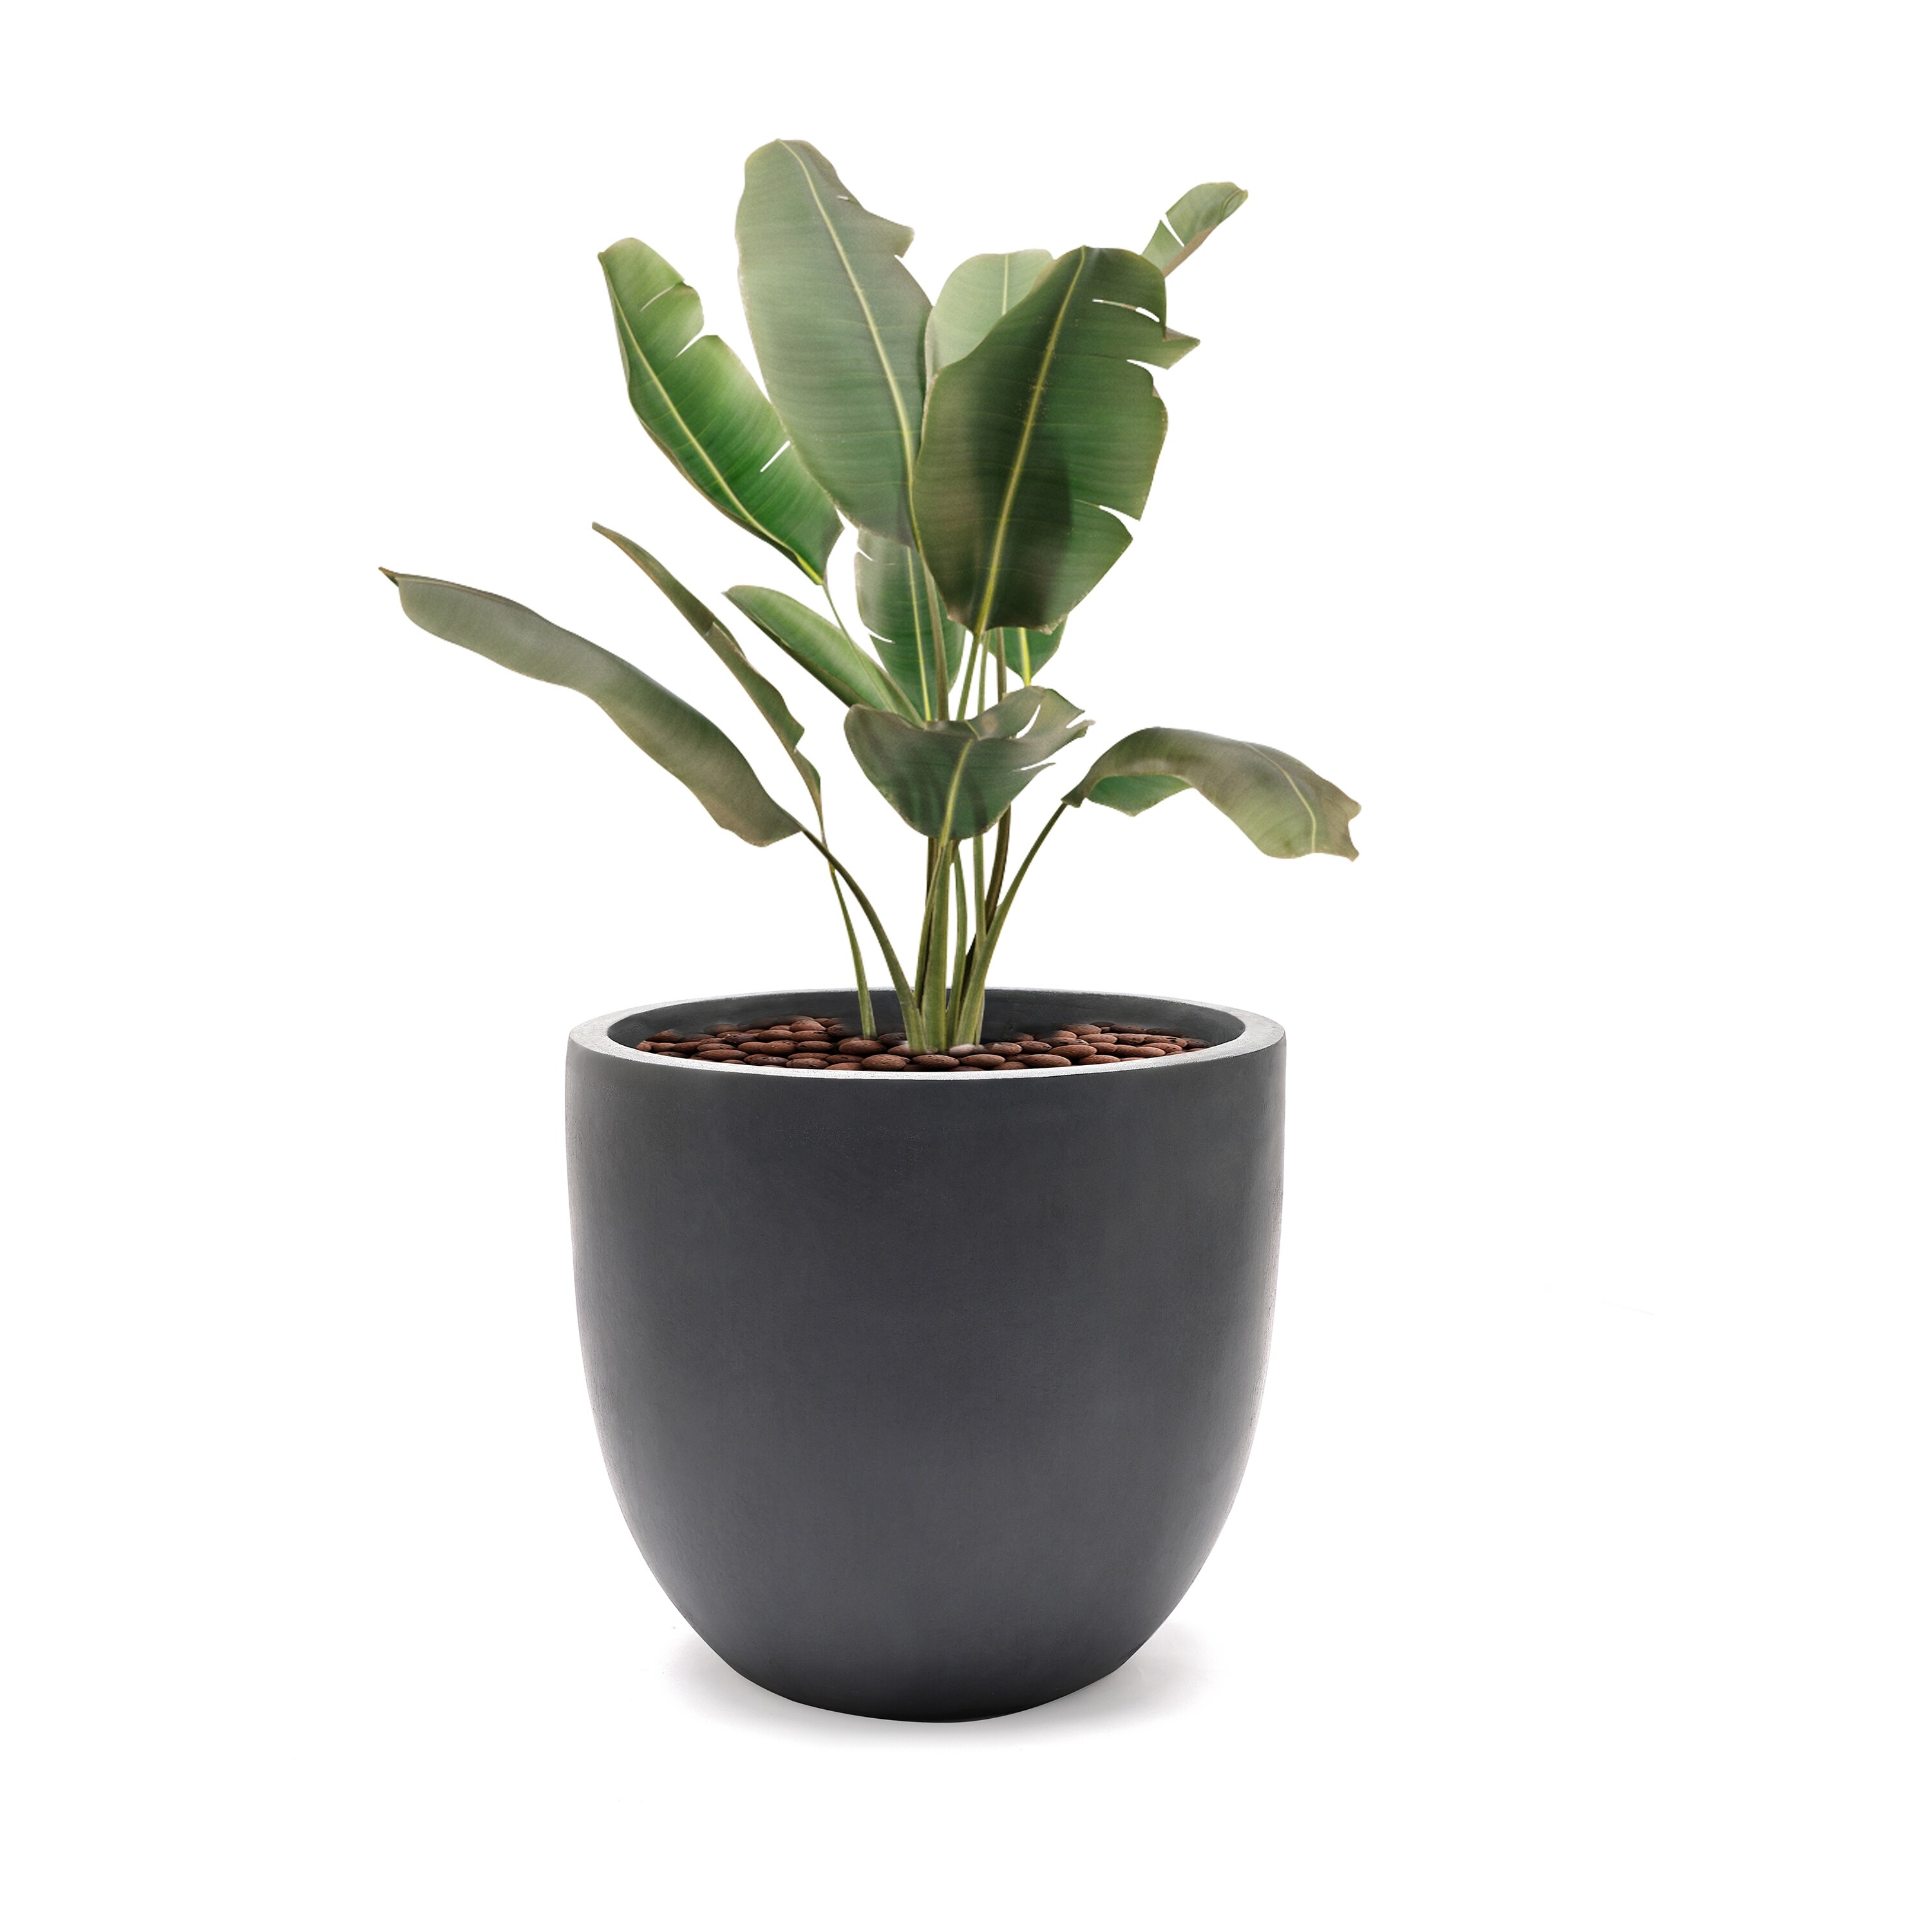 https://ak1.ostkcdn.com/images/products/is/images/direct/eded1e9f574743e252cf3877058f64221d2ae616/Round-MgO-Indoor---Outdoor-Planter.jpg